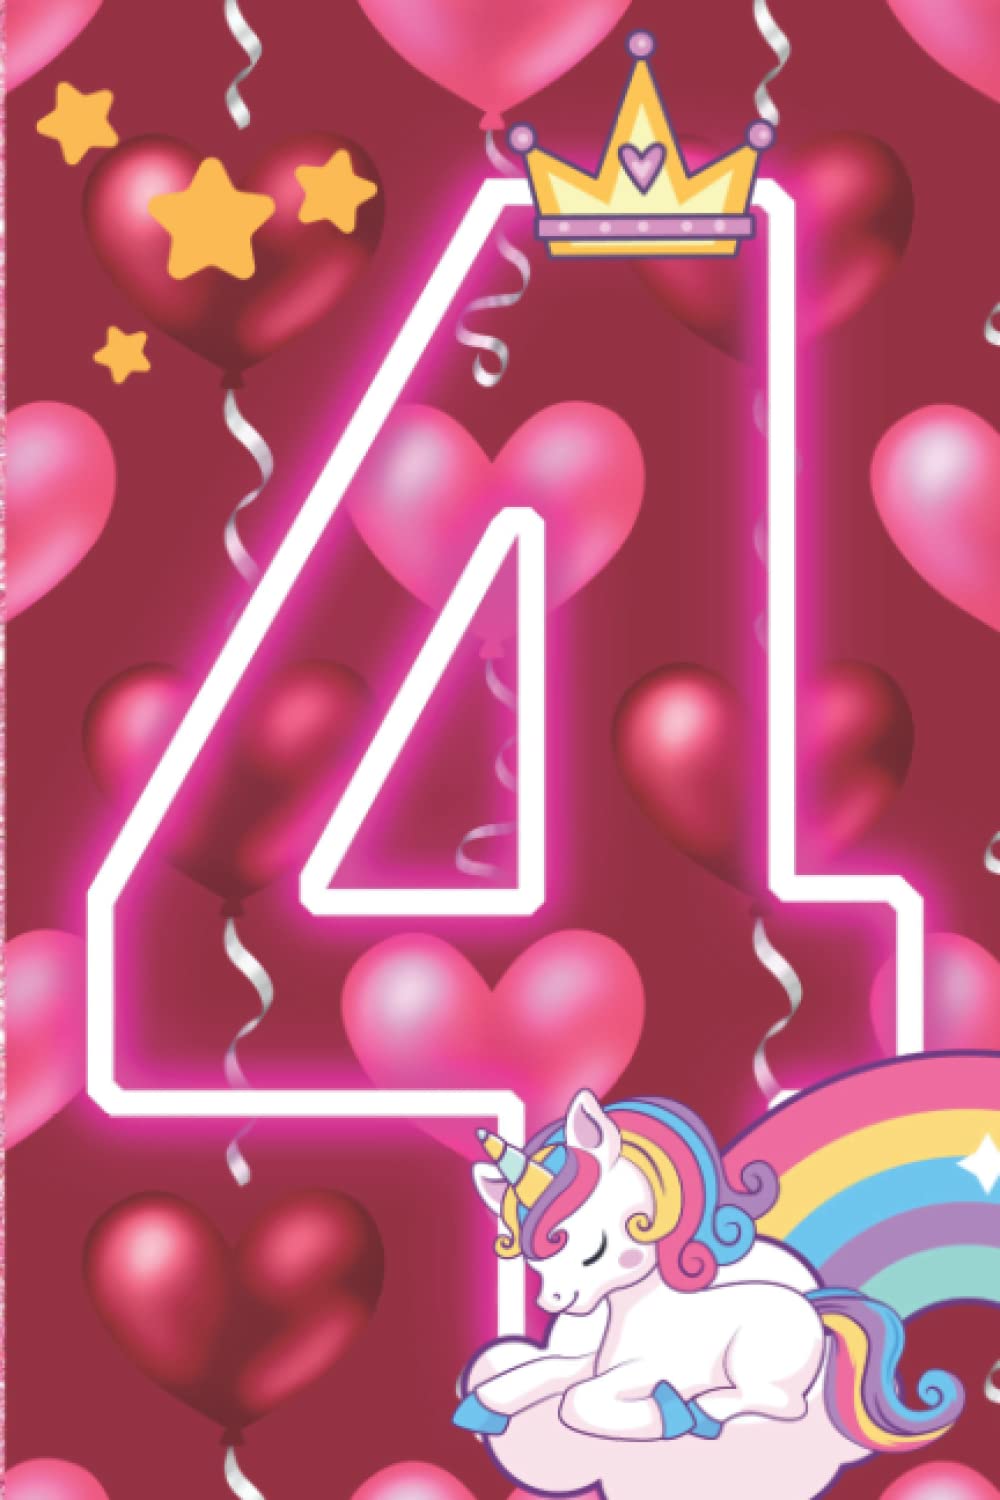 Happy 4th Birthday Girl: Unicorn Journal and Sketchbook Notebook Gift for Your Kids